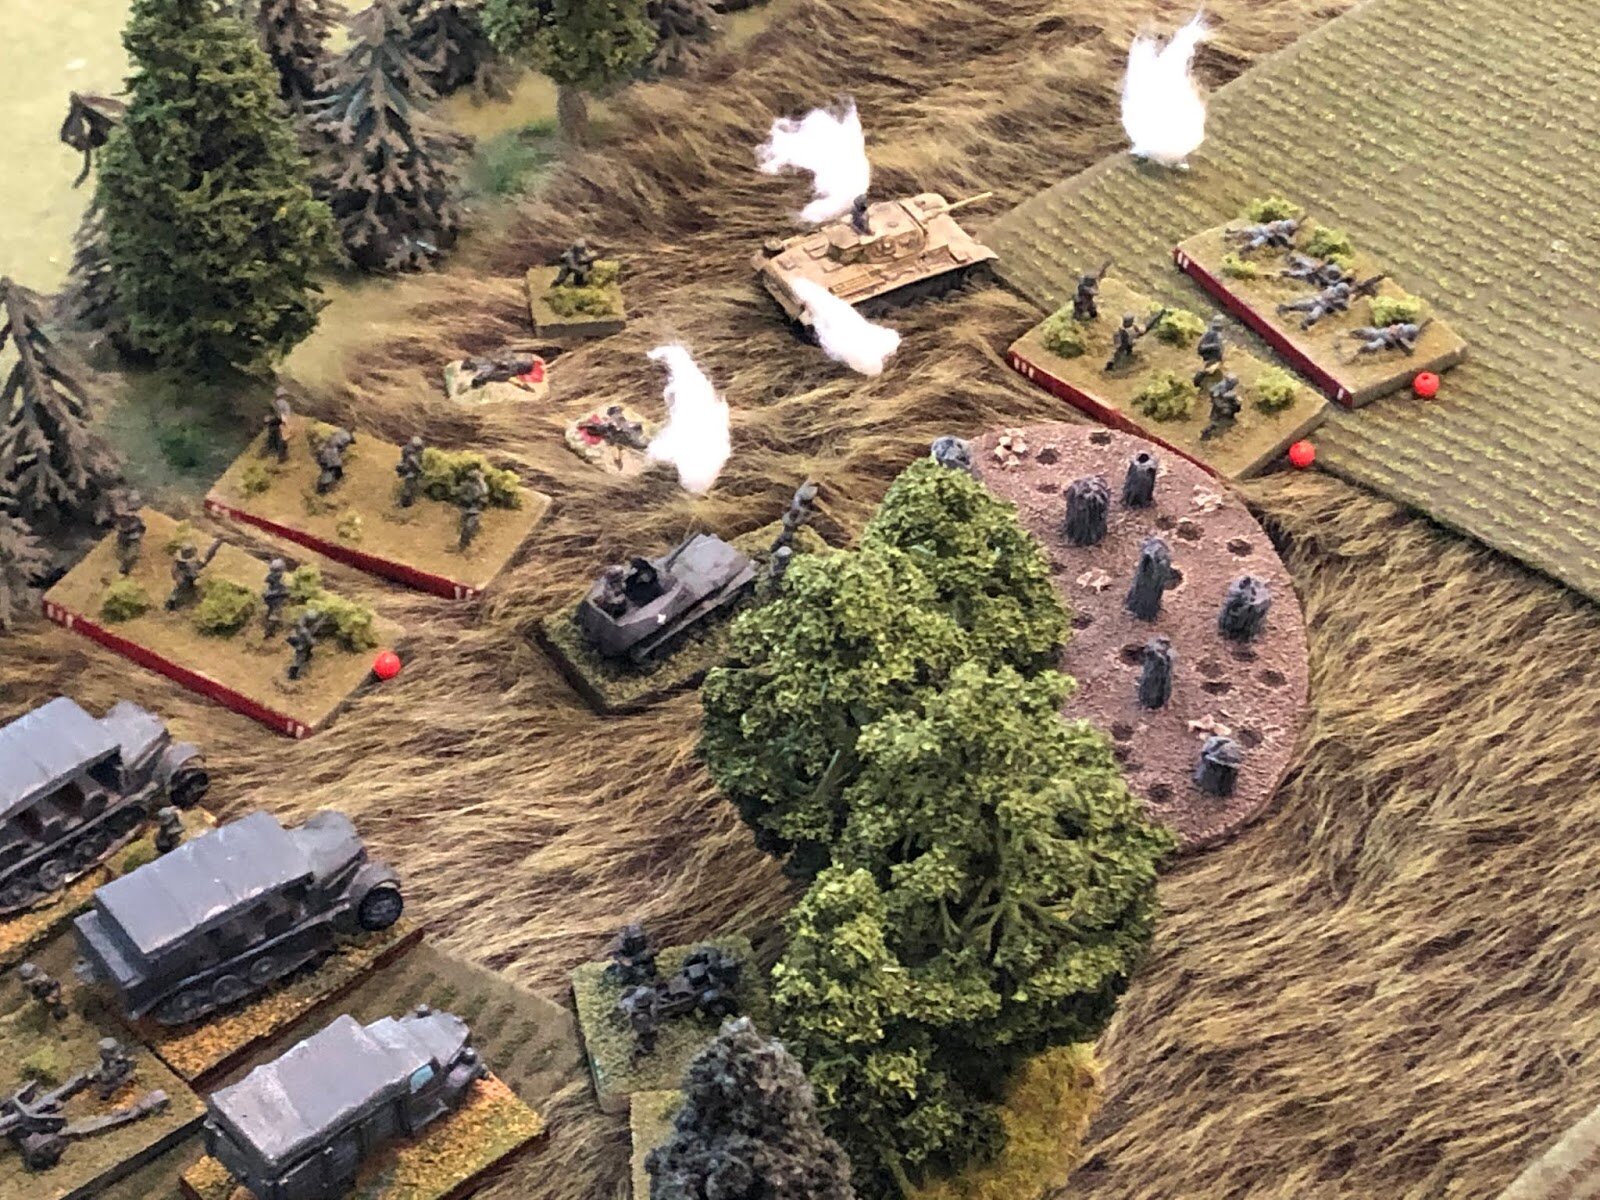  As the German CO moves up to 2nd Company to try and rally them, but the mortar fire is so fierce even he can't get them moving again! 